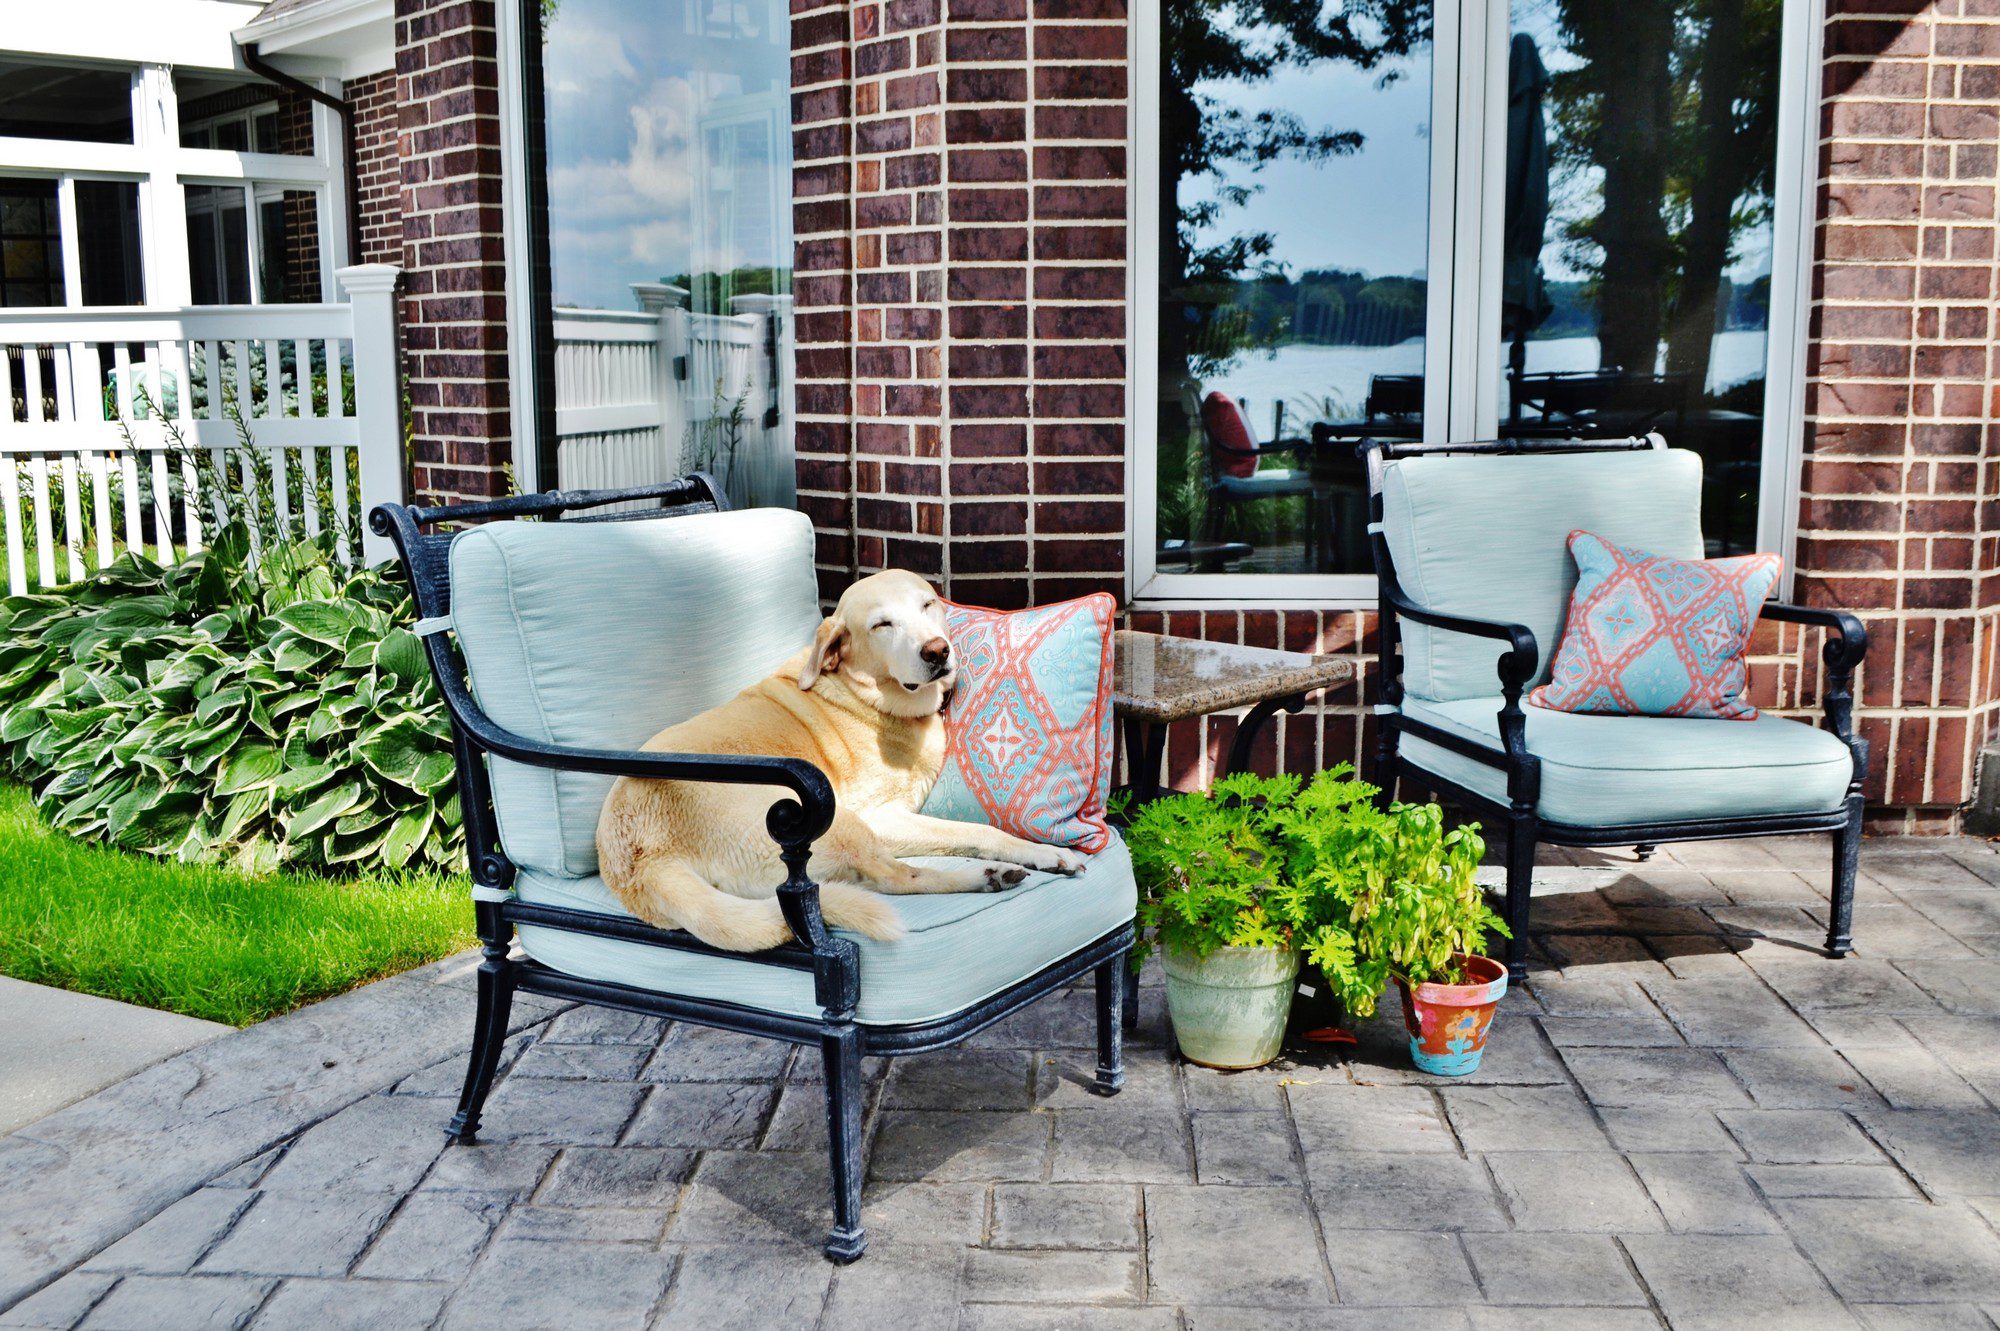 The image shows a patio area in front of a house with a brick exterior wall and large windows. There are two metal patio chairs with light blue cushions on them. On one of the chairs, a relaxed, light-coloured, large dog is lounging, enjoying the outdoors. Next to the chairs, there are some plants in pots, adding a touch of greenery to the setting. In the background, a body of water can be glimpsed, suggesting that the house is located near a lake or river. It's a sunny day with a clear blue sky, and the atmosphere appears serene and comfortable, ideal for relaxation.